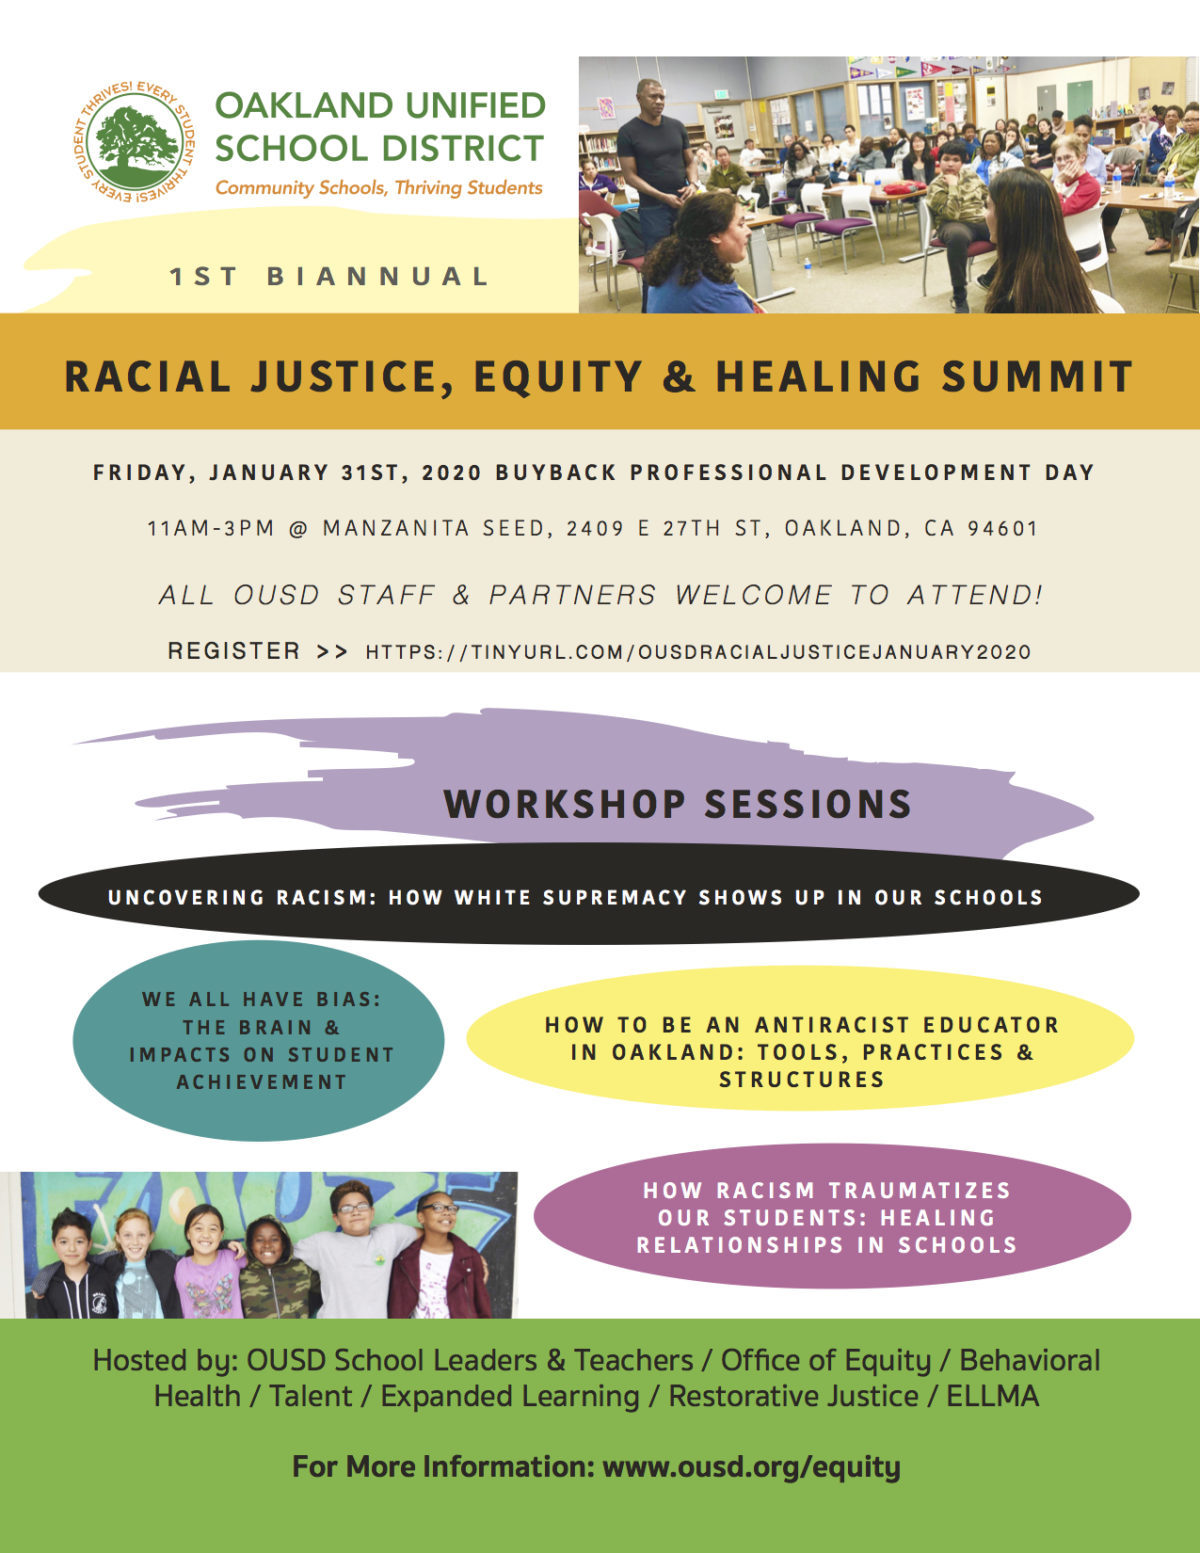 Image of a flyer promoting Oakland Unified School District’s first biannual Racial Justice, Equity, & Healing Summit held on January 31, 2020.